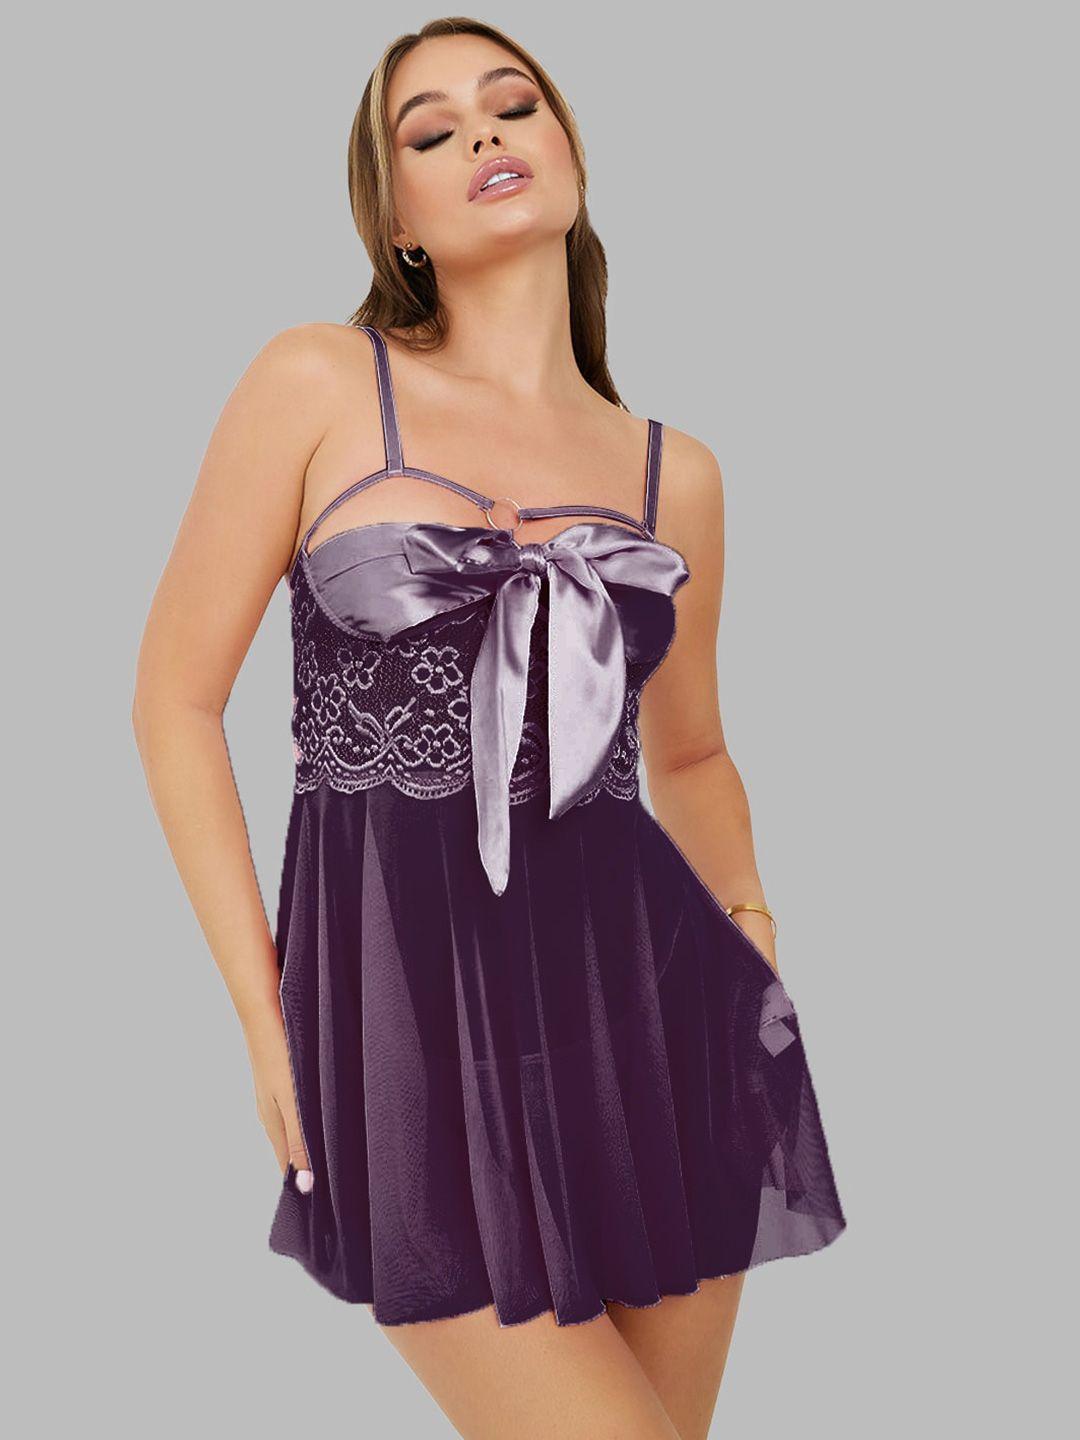 fimbul front bow tie-up baby doll with brief